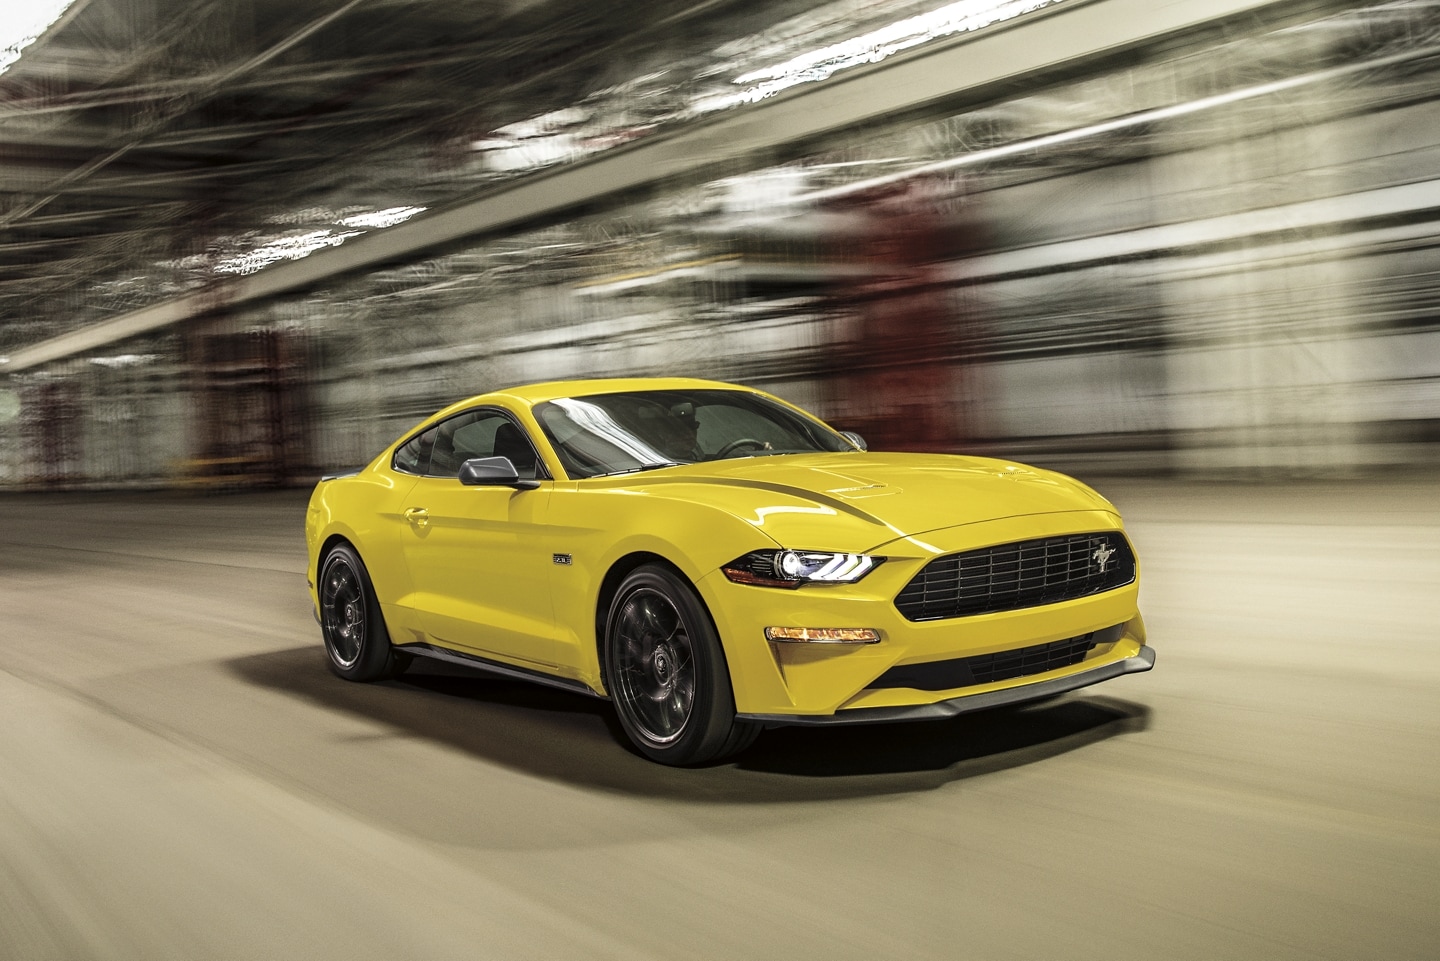 A 2021 Ford Mustang with the high performance package